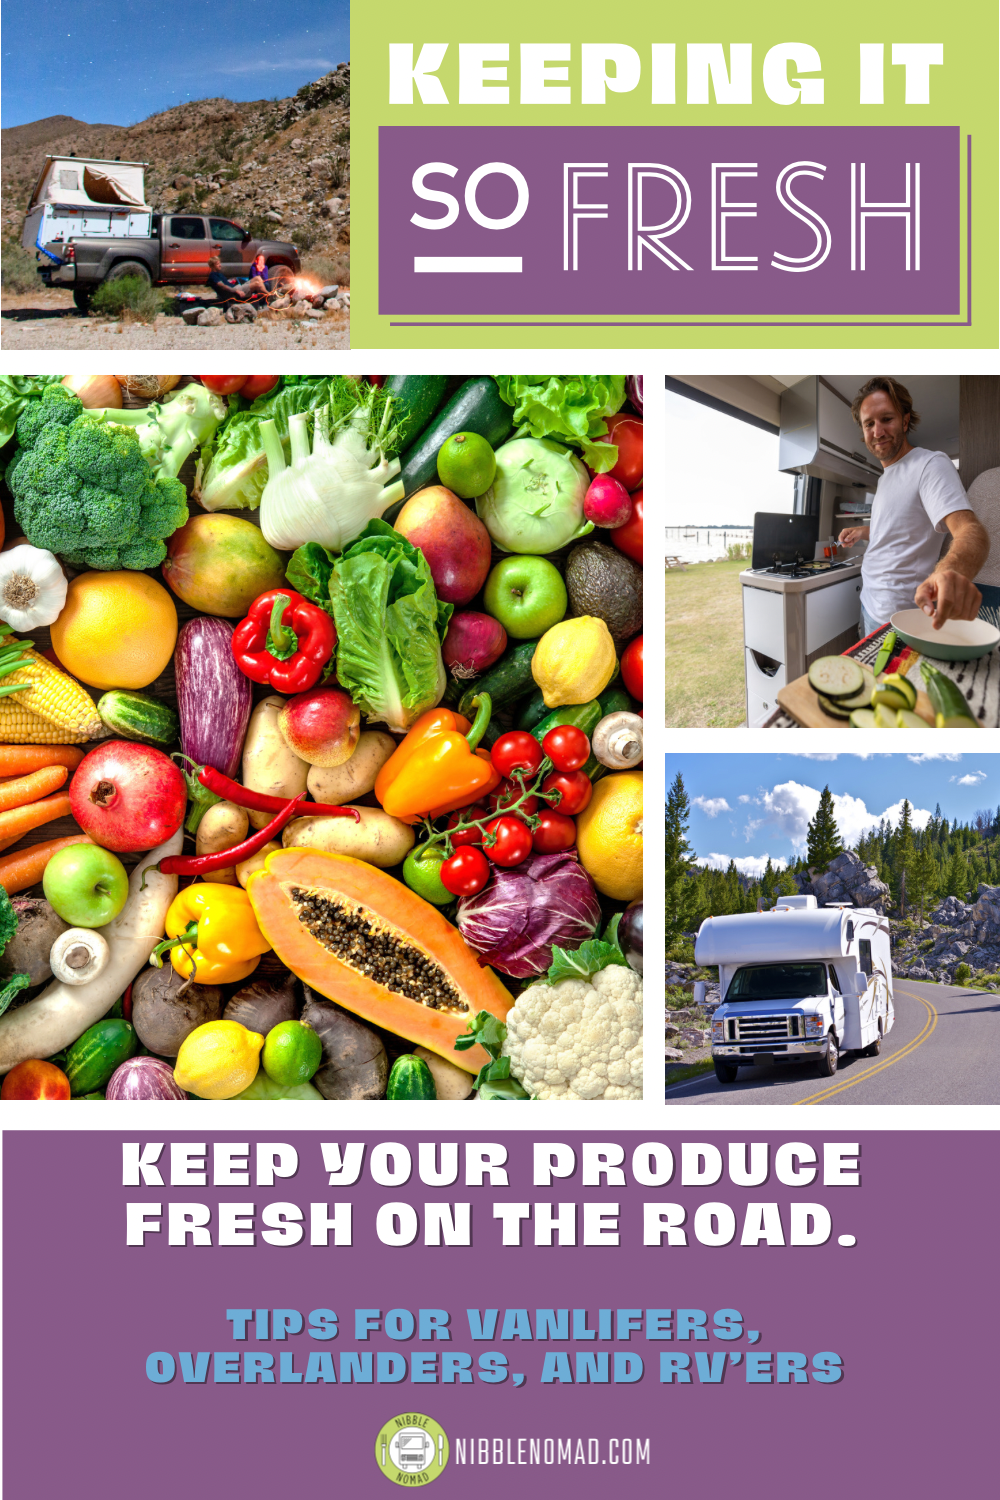 Keep Your Produce Fresh On The Road Tips For Vanlifers Overlanders RVers Pin Nibblenomad